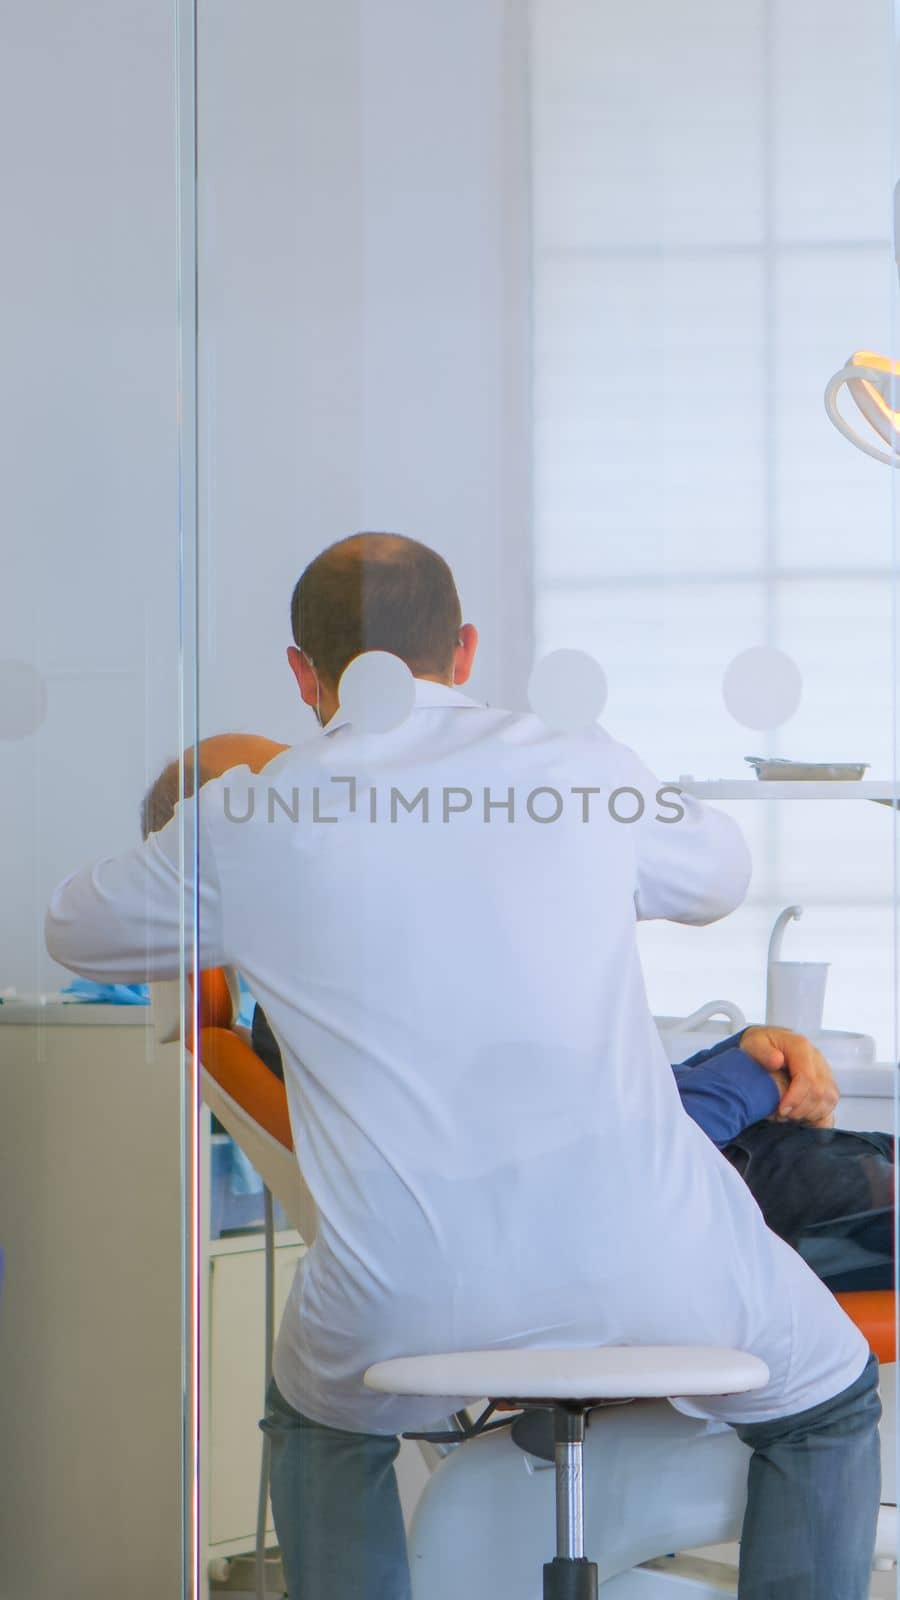 Patients asking for help filling in dental registration form preparing for exemination. Senior woman sitting on chair in waiting area of crowded orthodontist office while doctor working in background